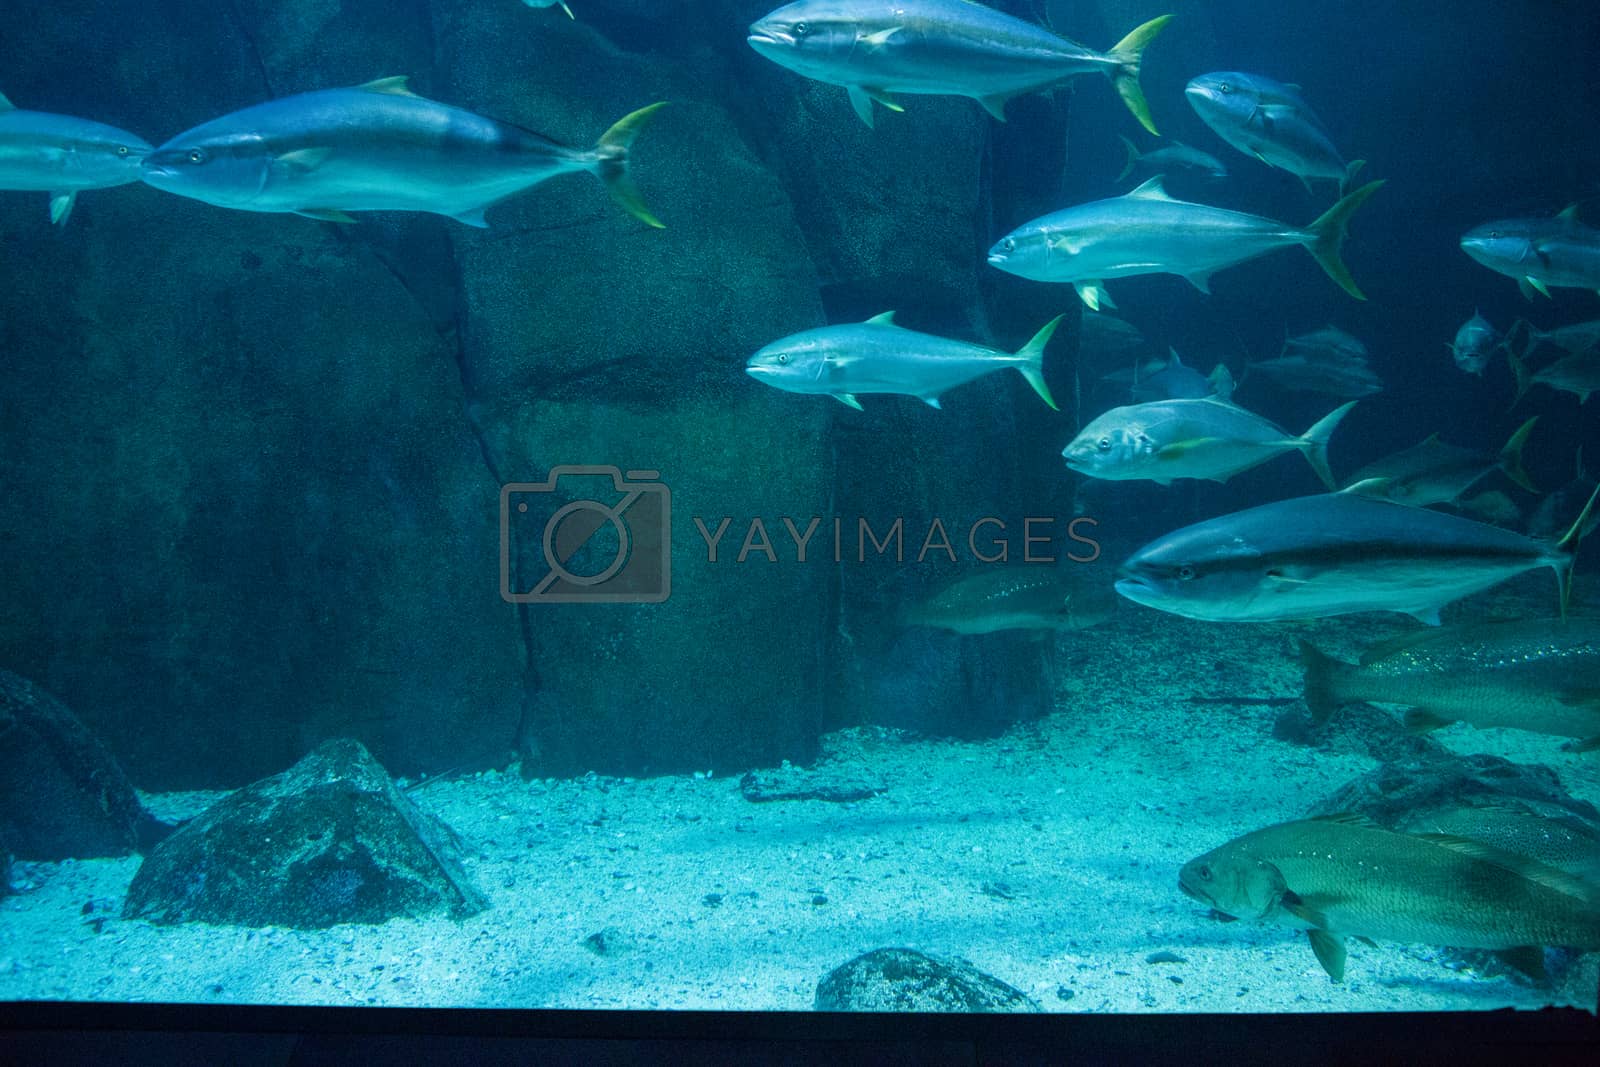 Royalty free image of Fish swimming in a tank by Wavebreakmedia